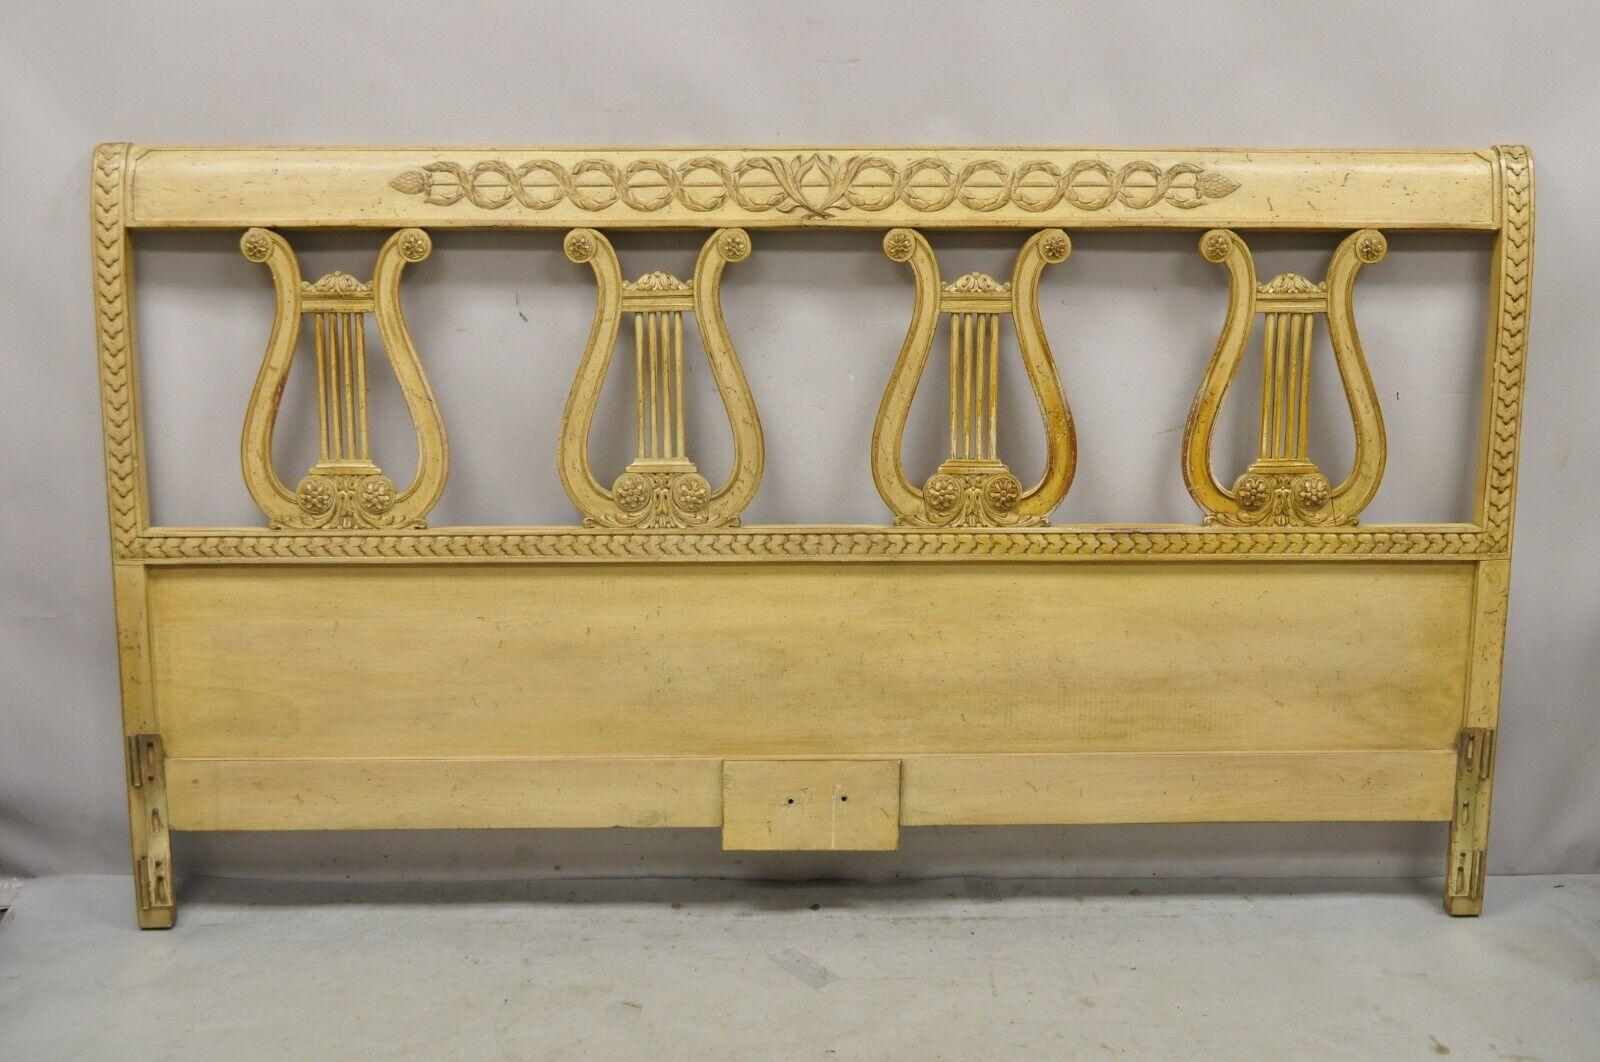 Vintage King Size Neoclassical Style Carved Lyre Harp Wooden Bed Headboard. Item features (4) carved wood harps, solid wood construction, distressed finish, very nice vintage item, great style and form. circa Mid-20th century. Measurements: 45.5